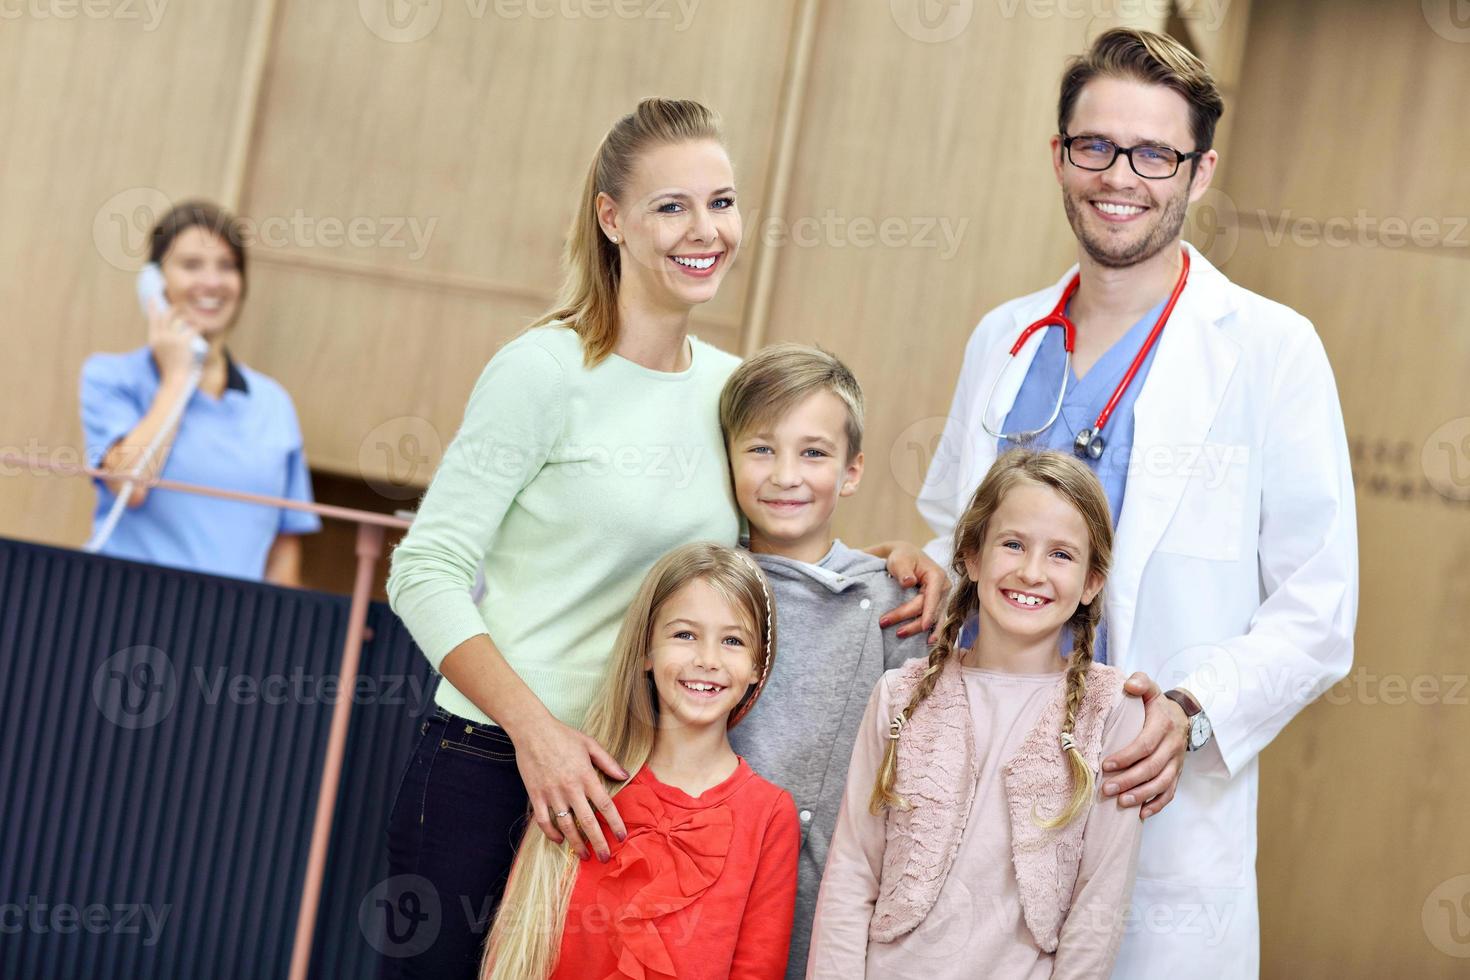 Mother and children together in hospital with doctor photo